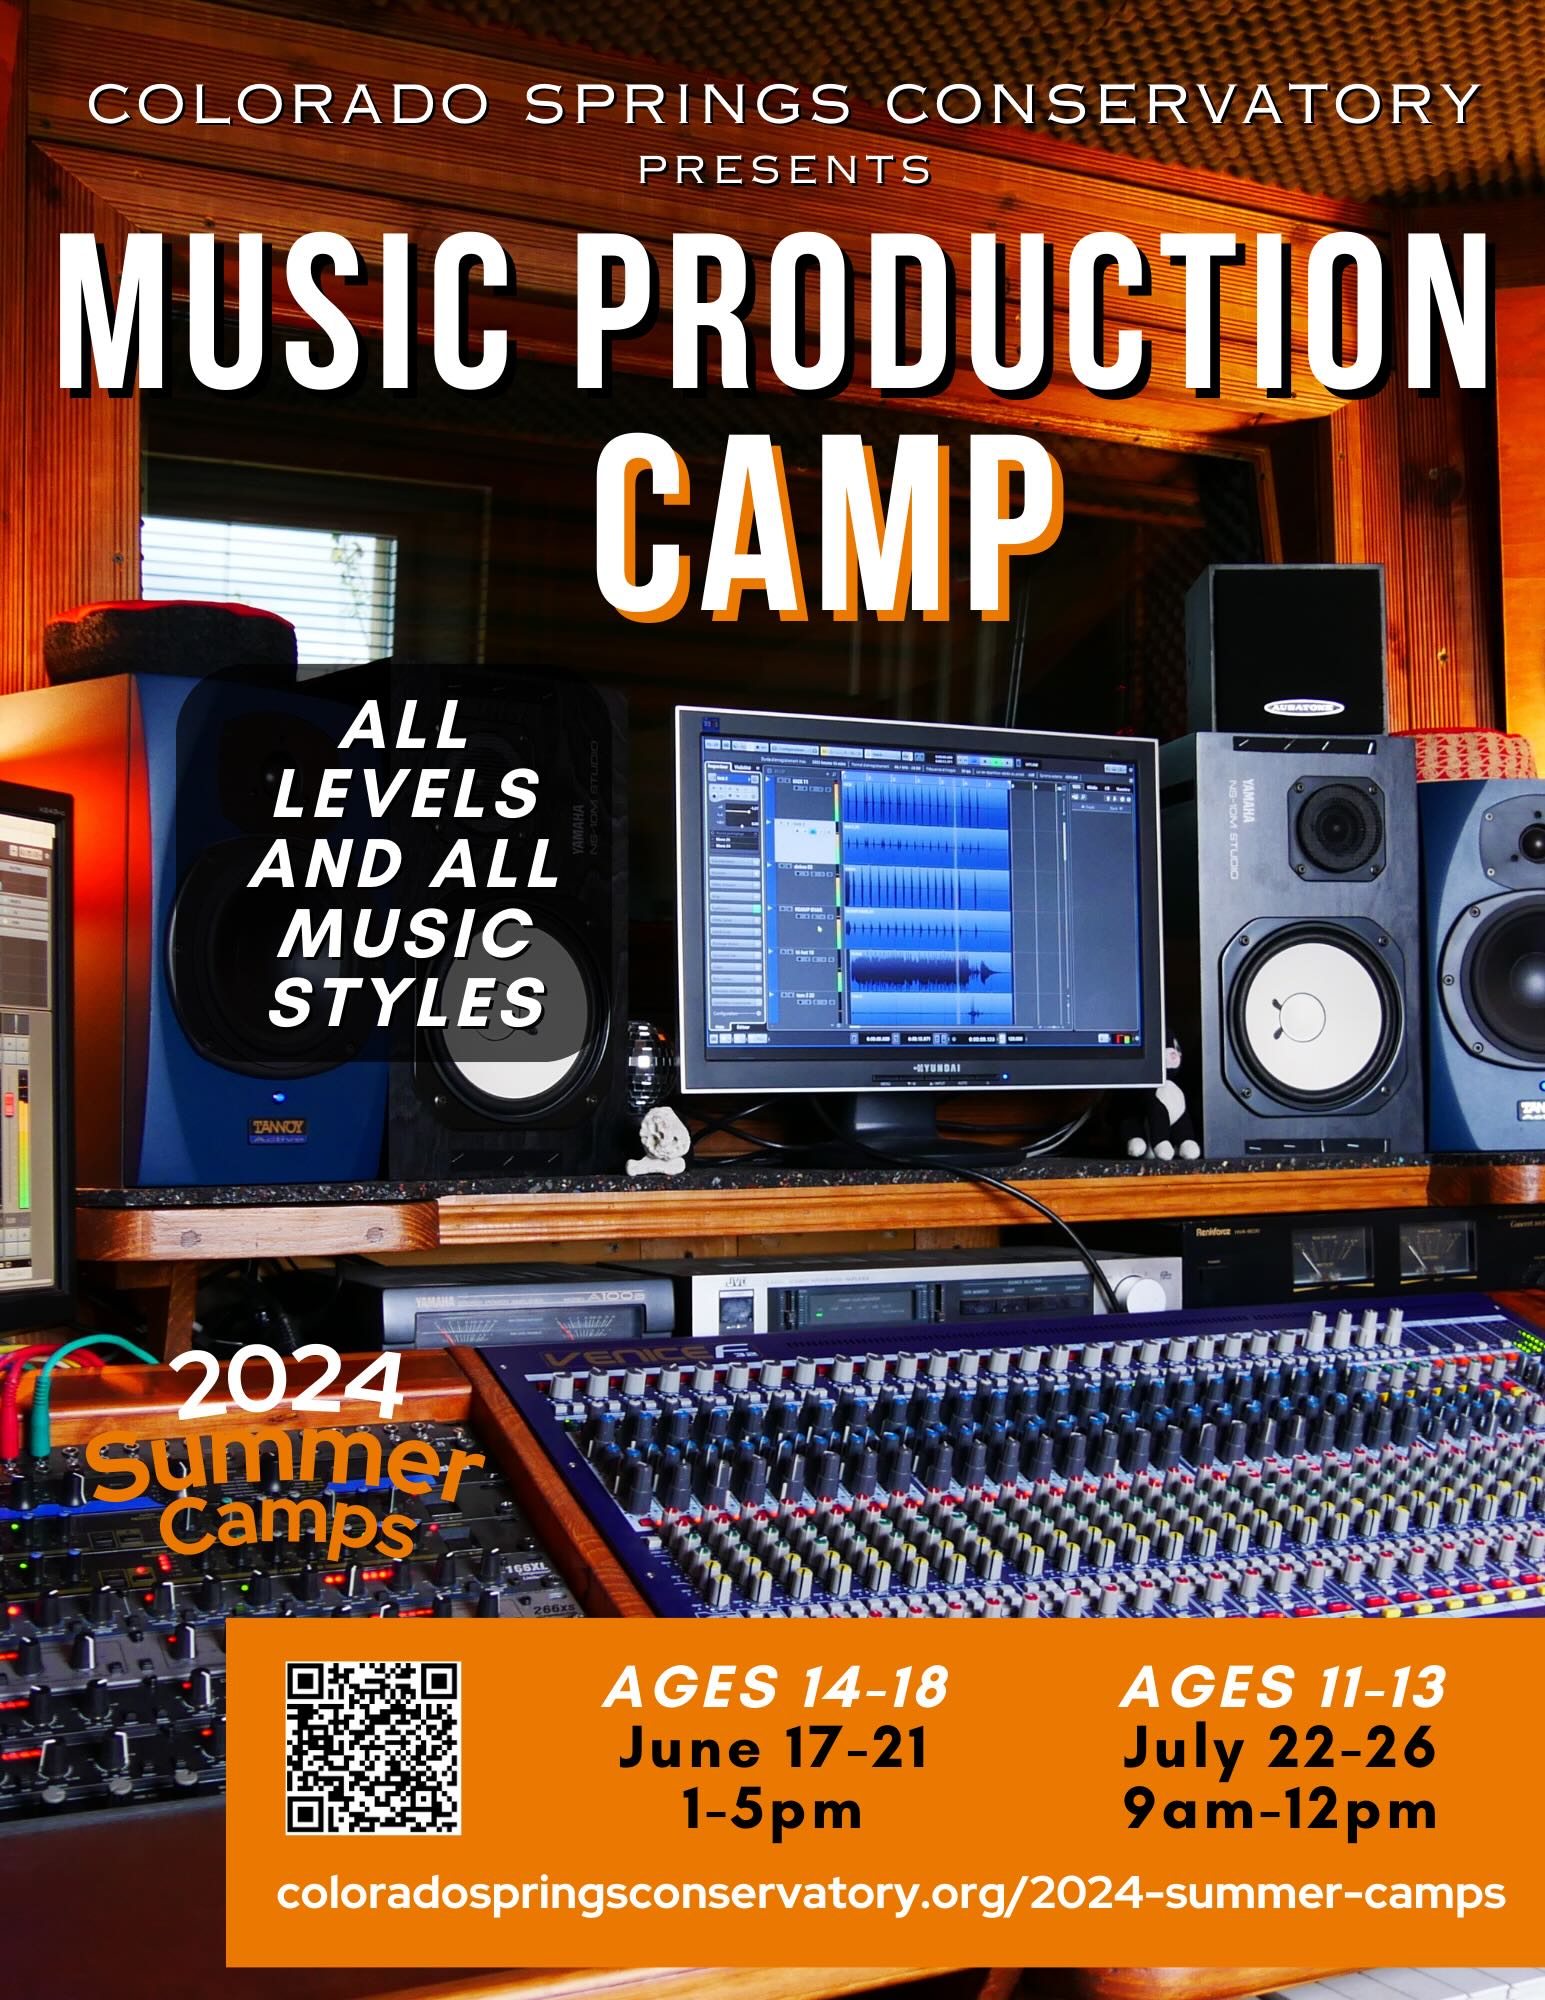 Music production camp